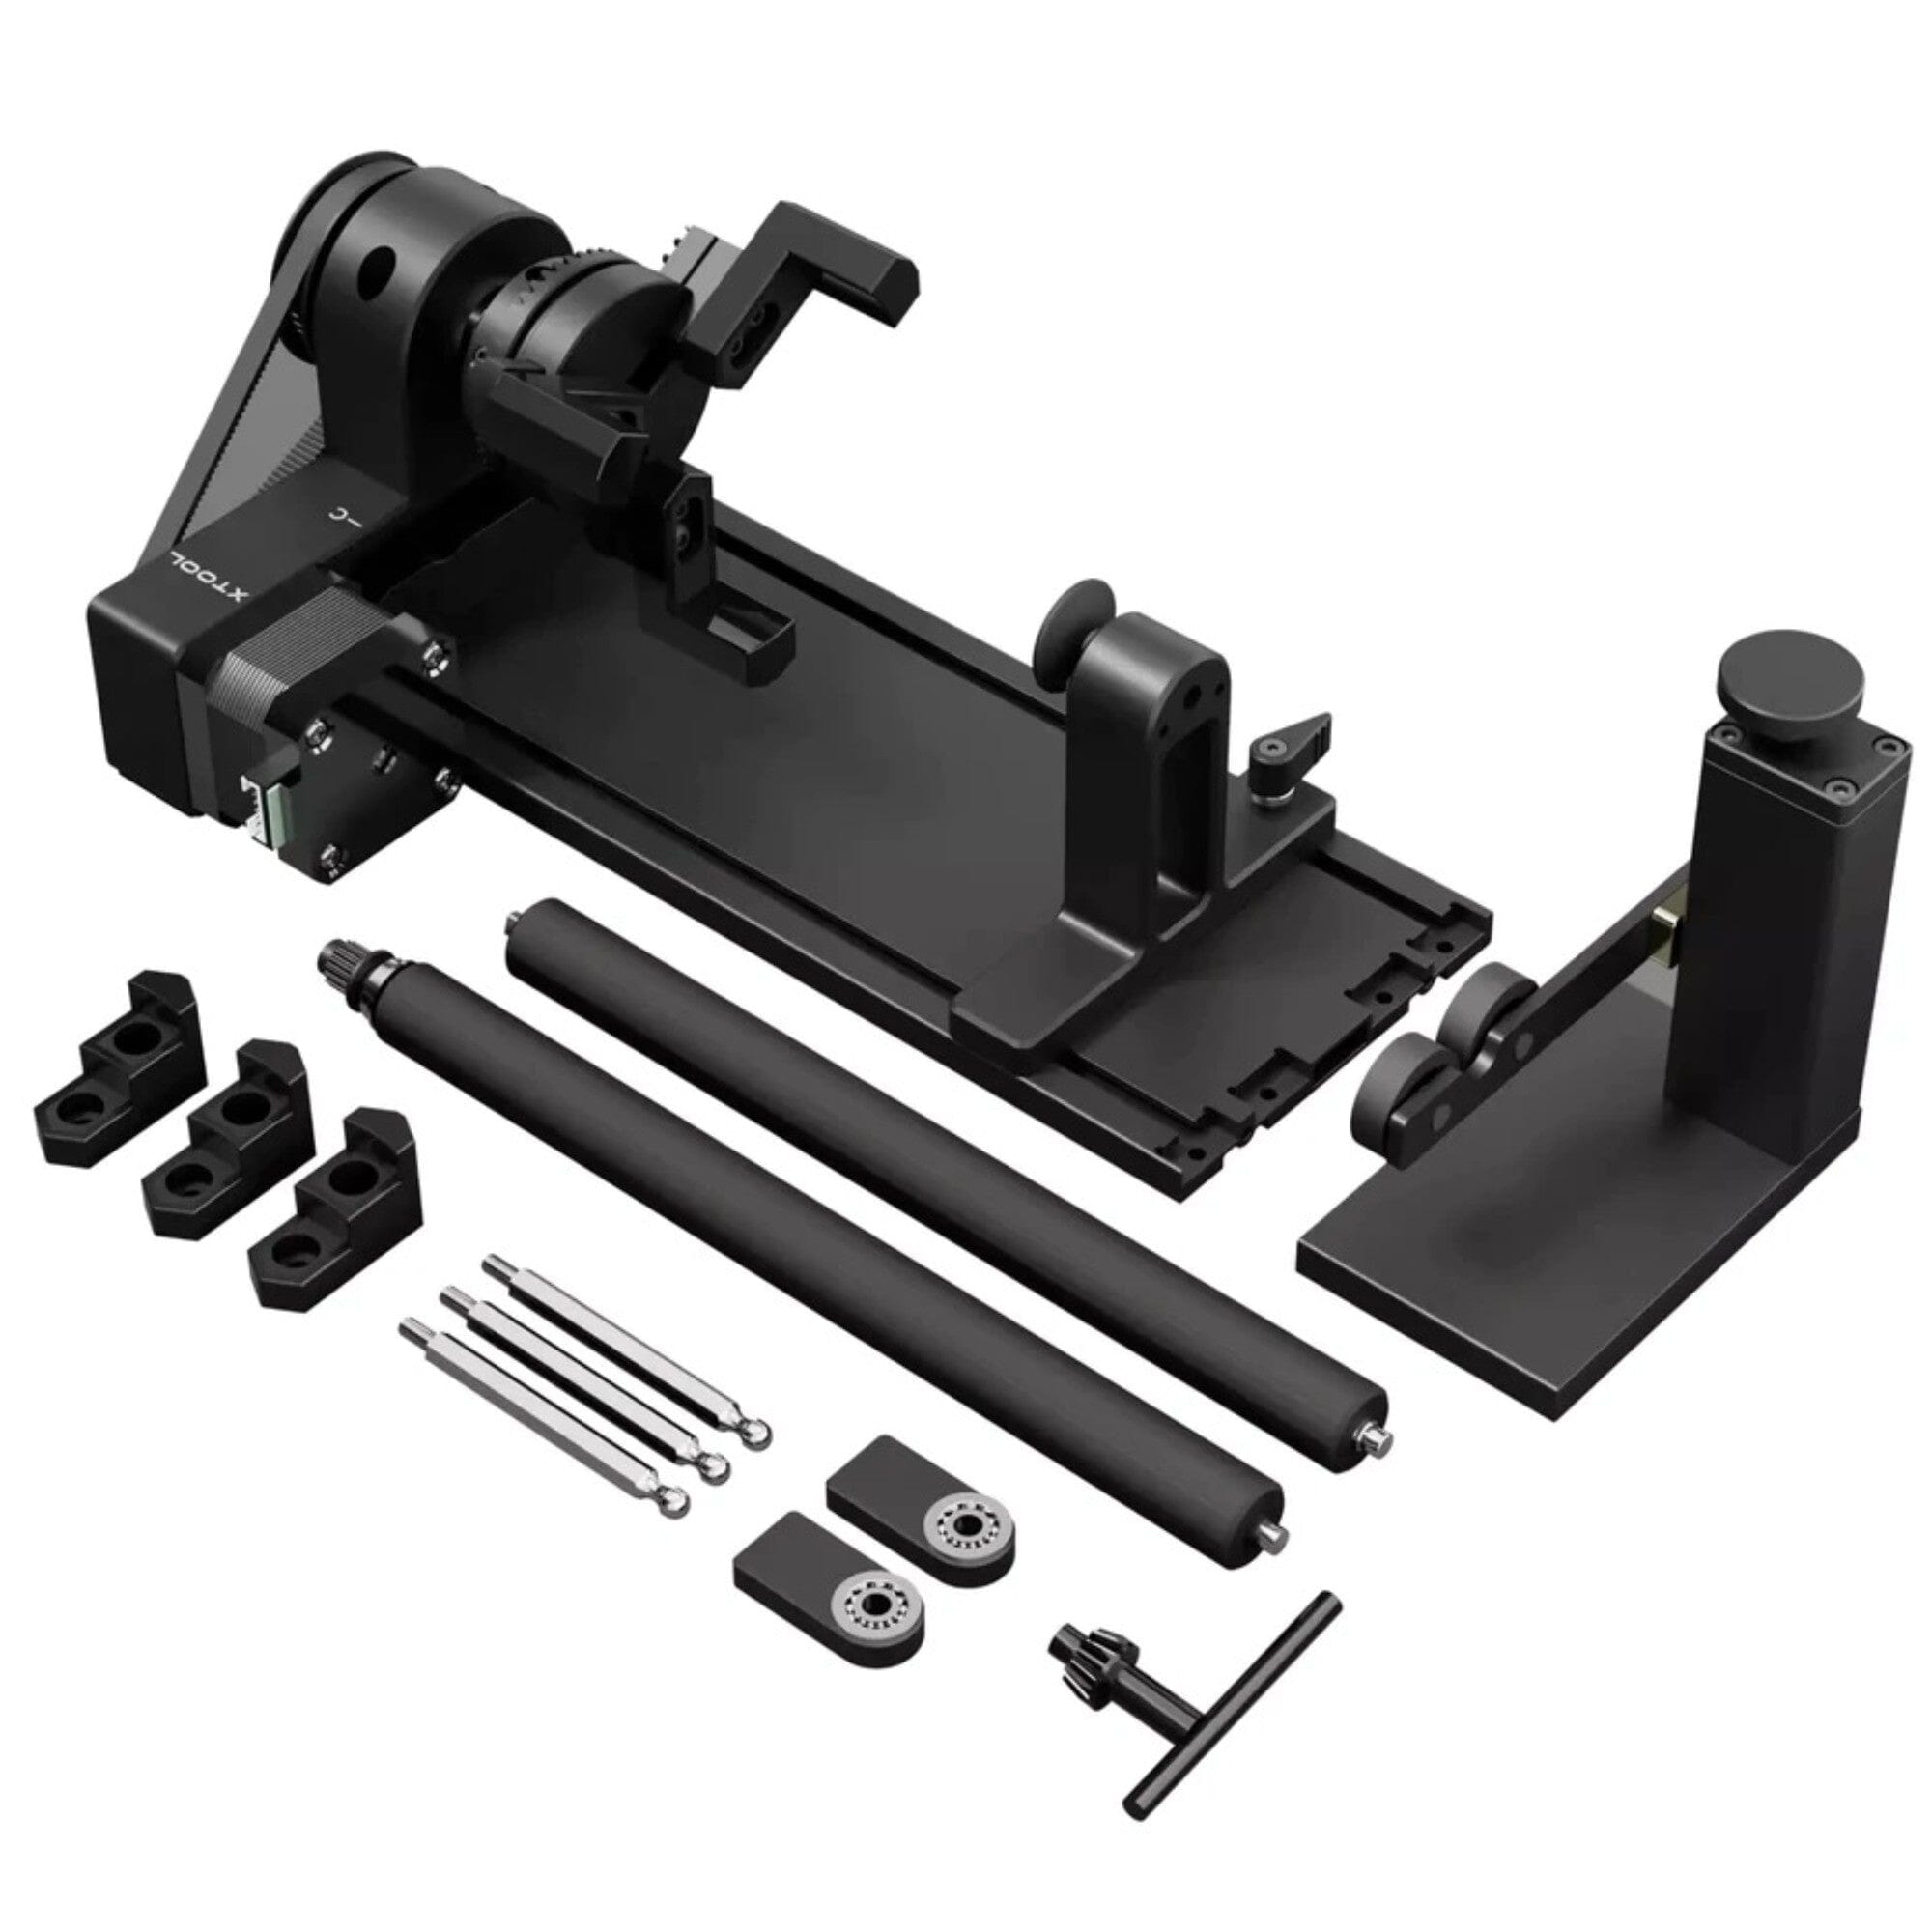 X-tool D1 RA-2 Pro Rotary Engraving Accessories for the RA-2 Pro 